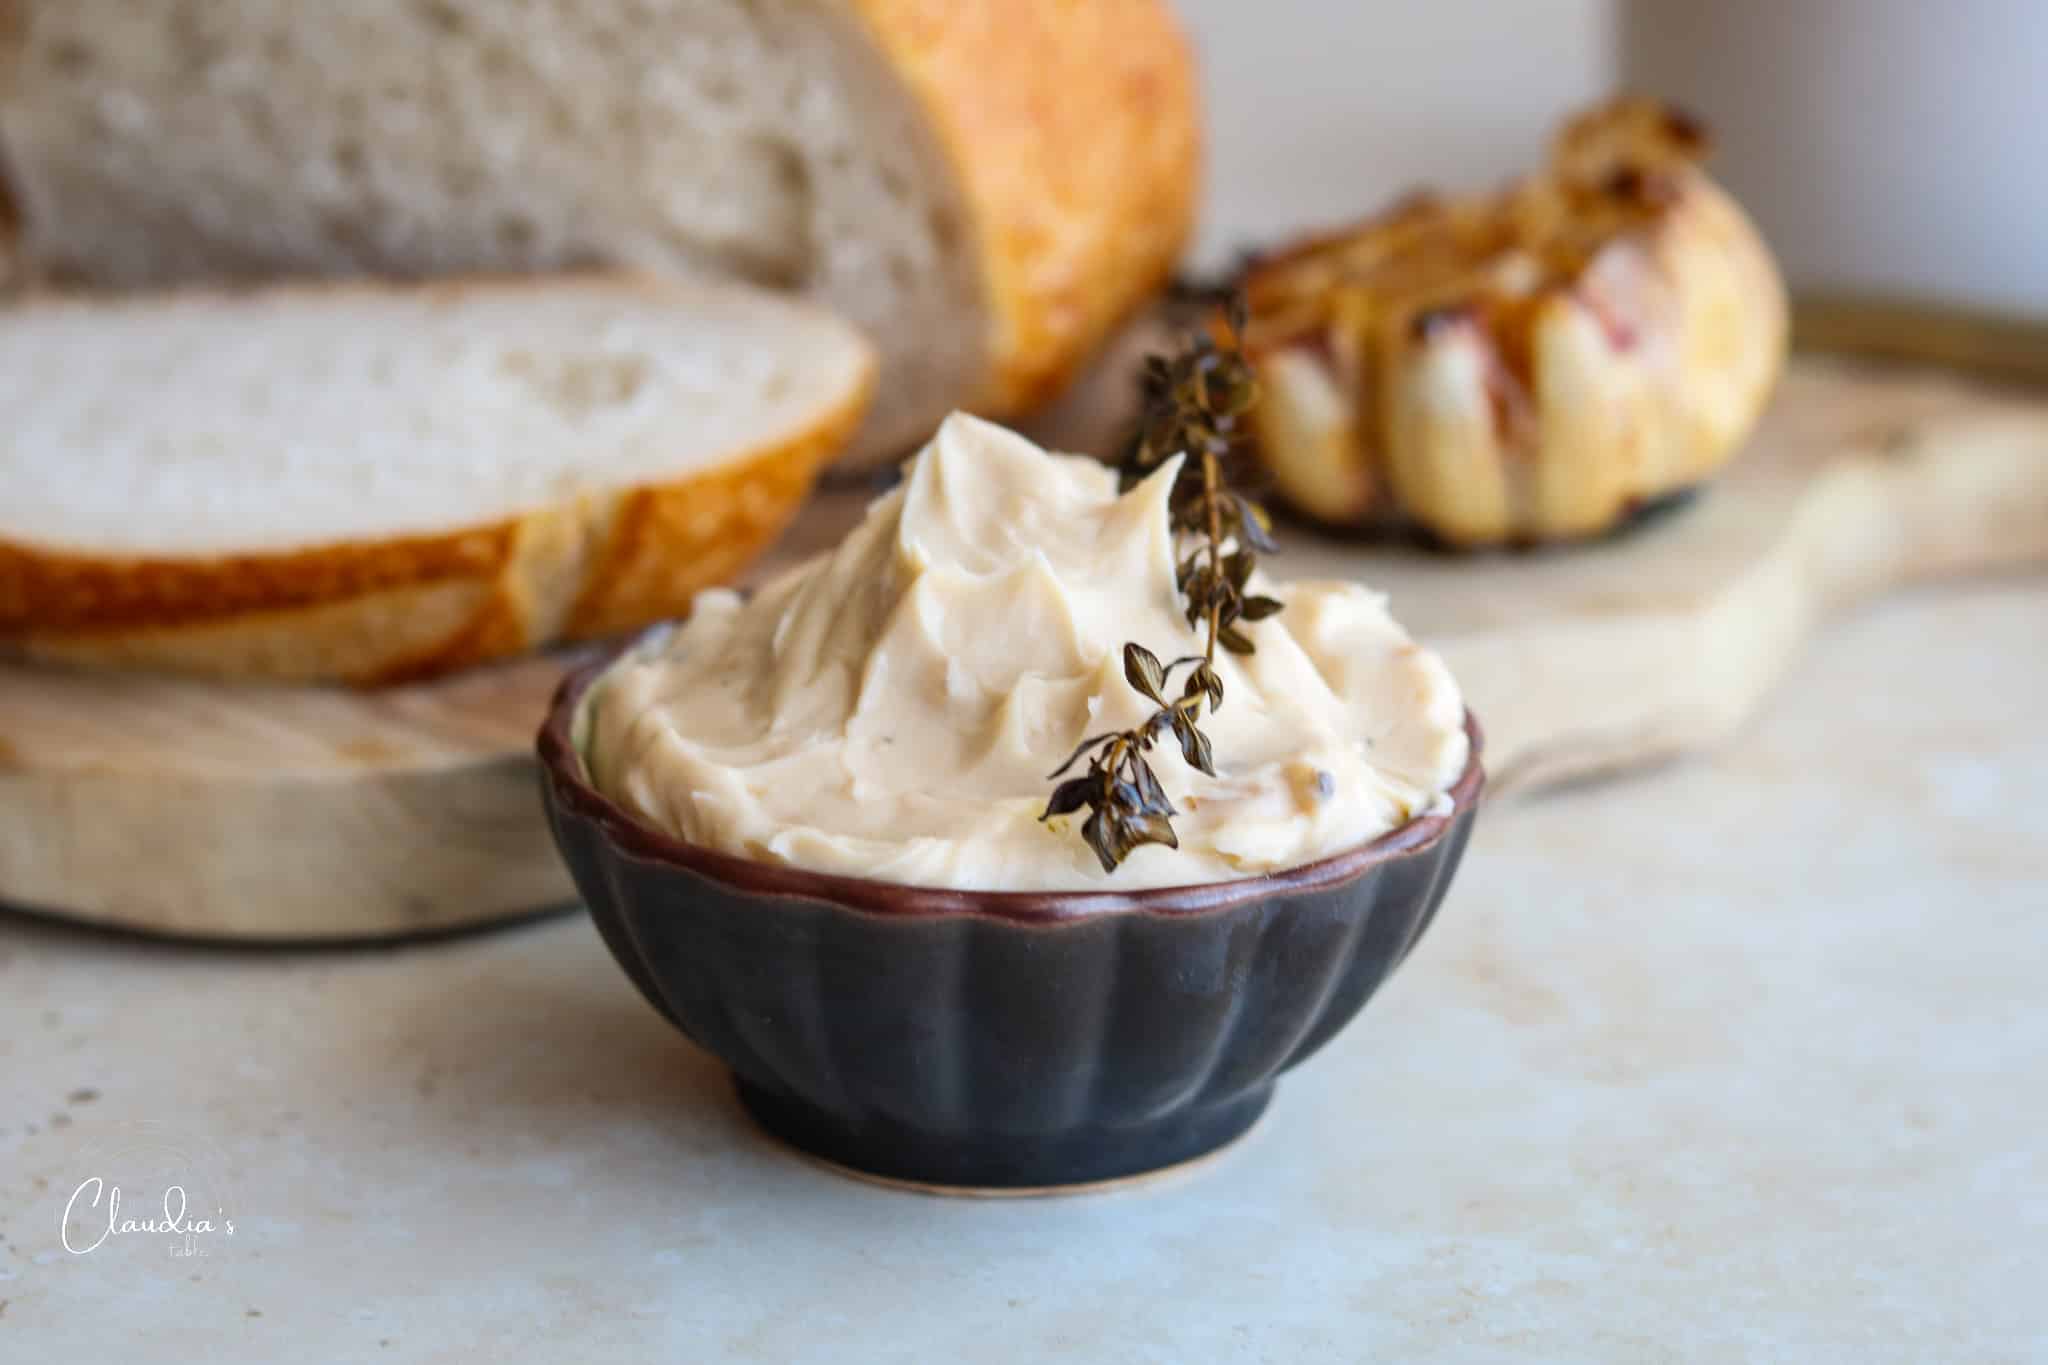 Roasted Garlic Compound Butter